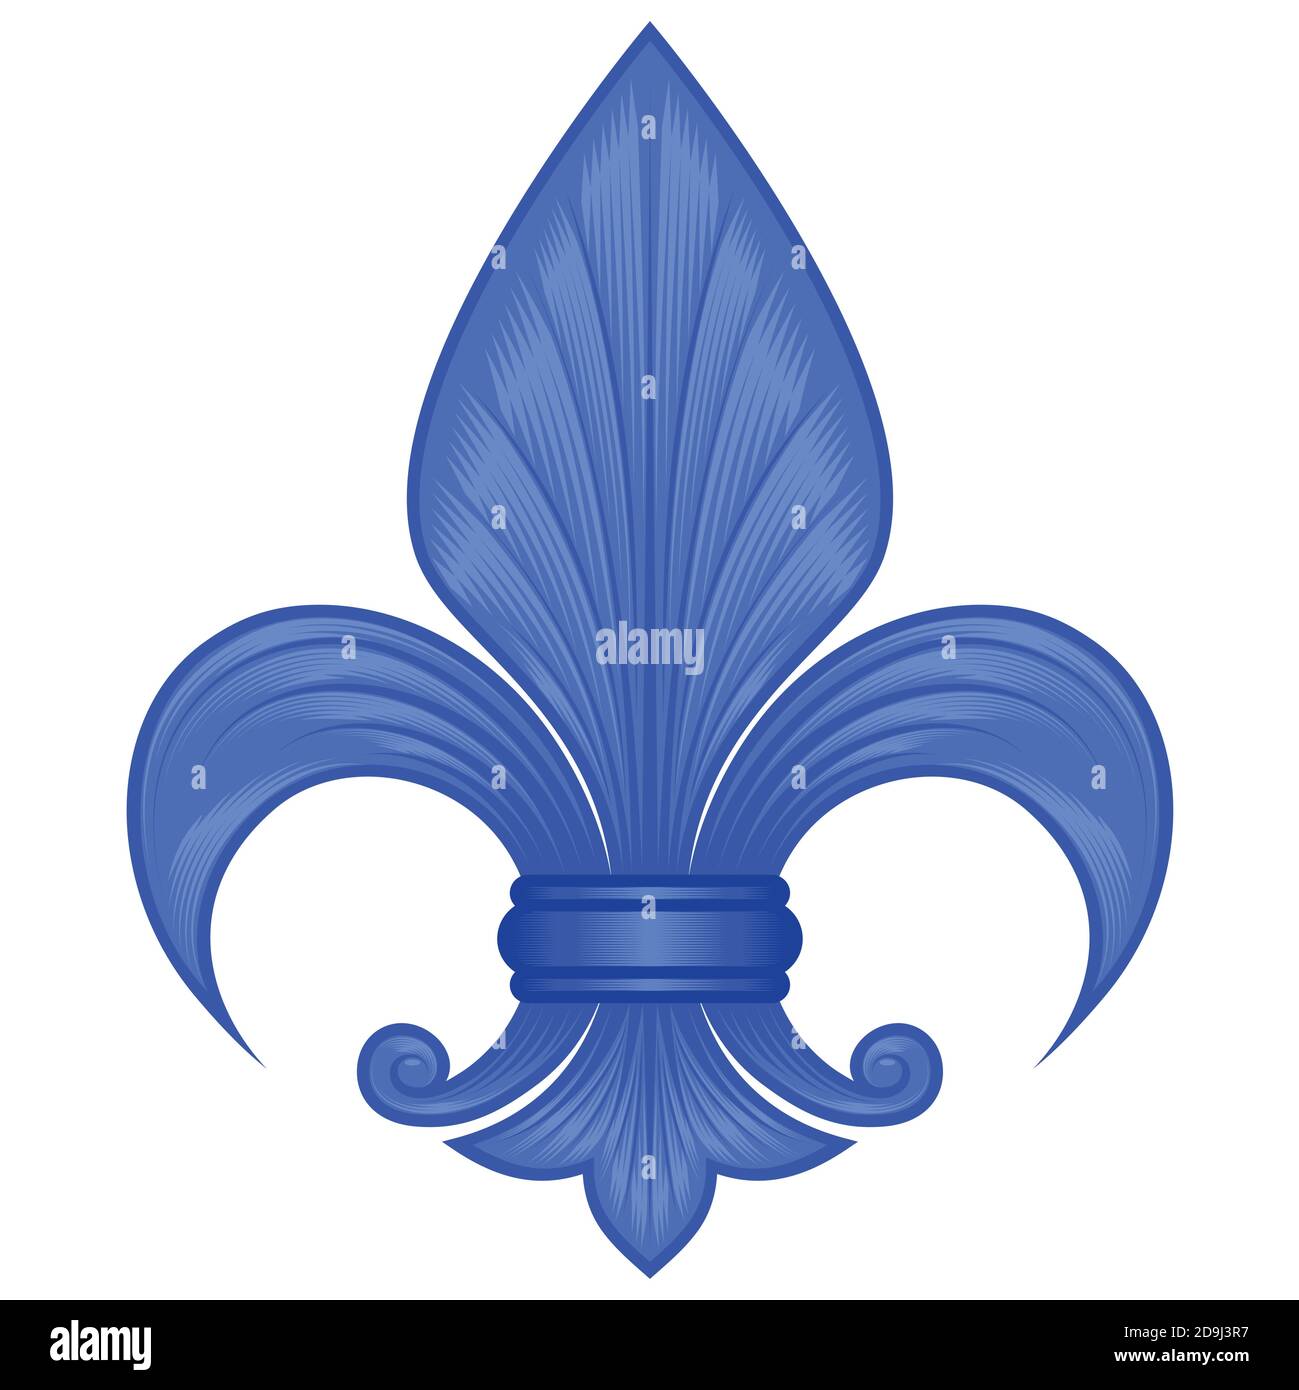 Vector design of the fleur de lis, representation of the lily flower, symbol used in medieval heraldry. All on white background. Stock Vector